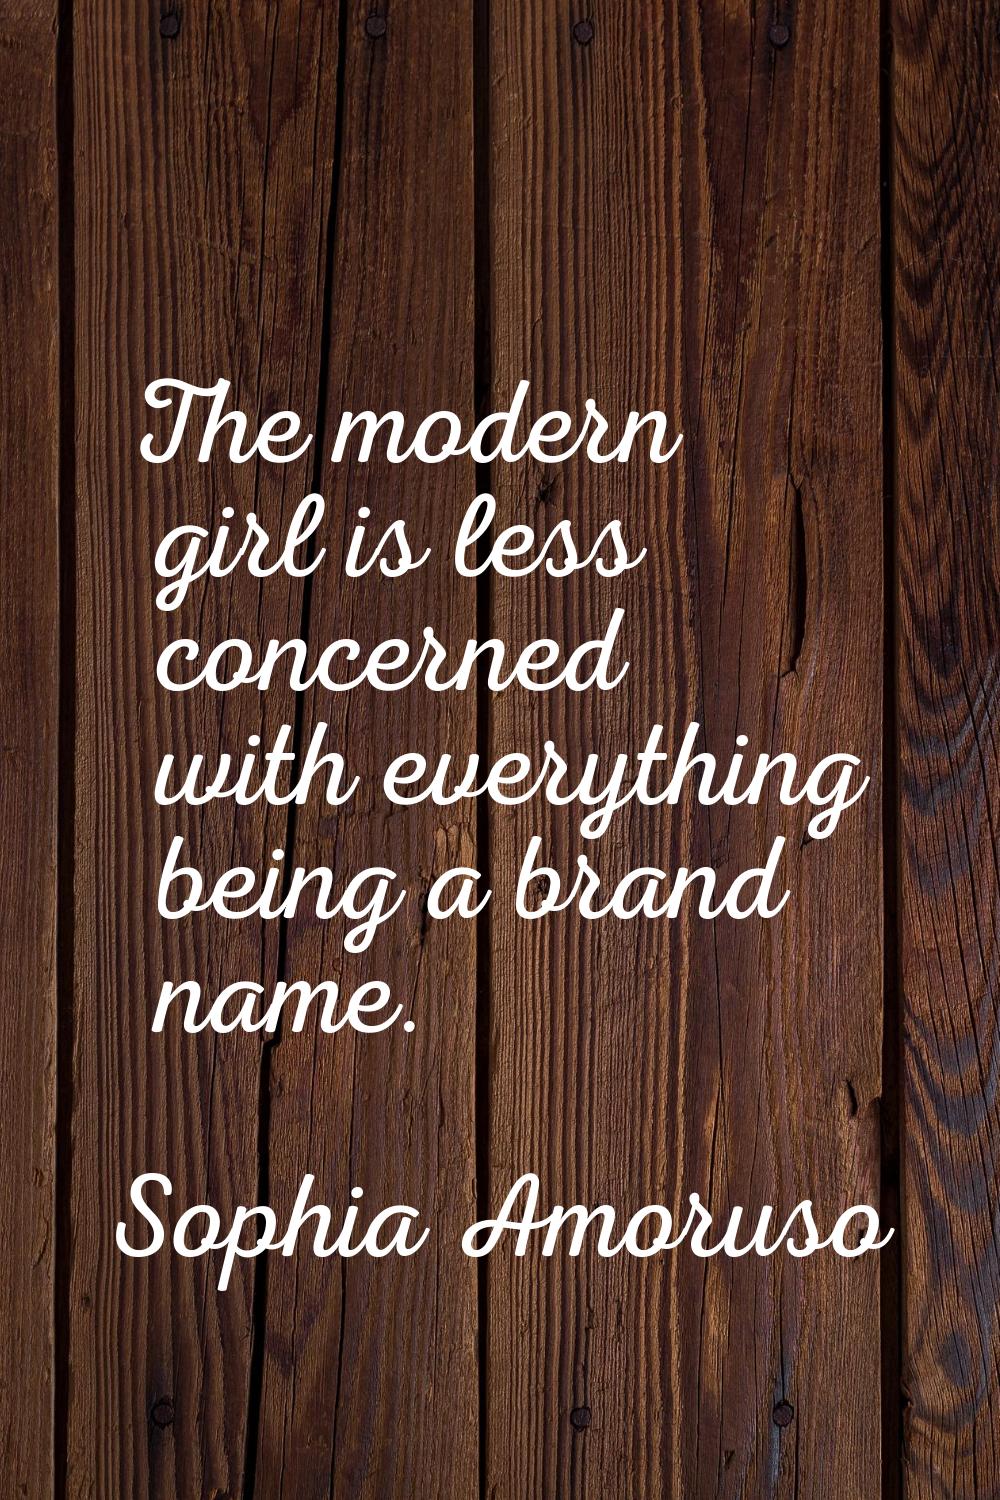 The modern girl is less concerned with everything being a brand name.